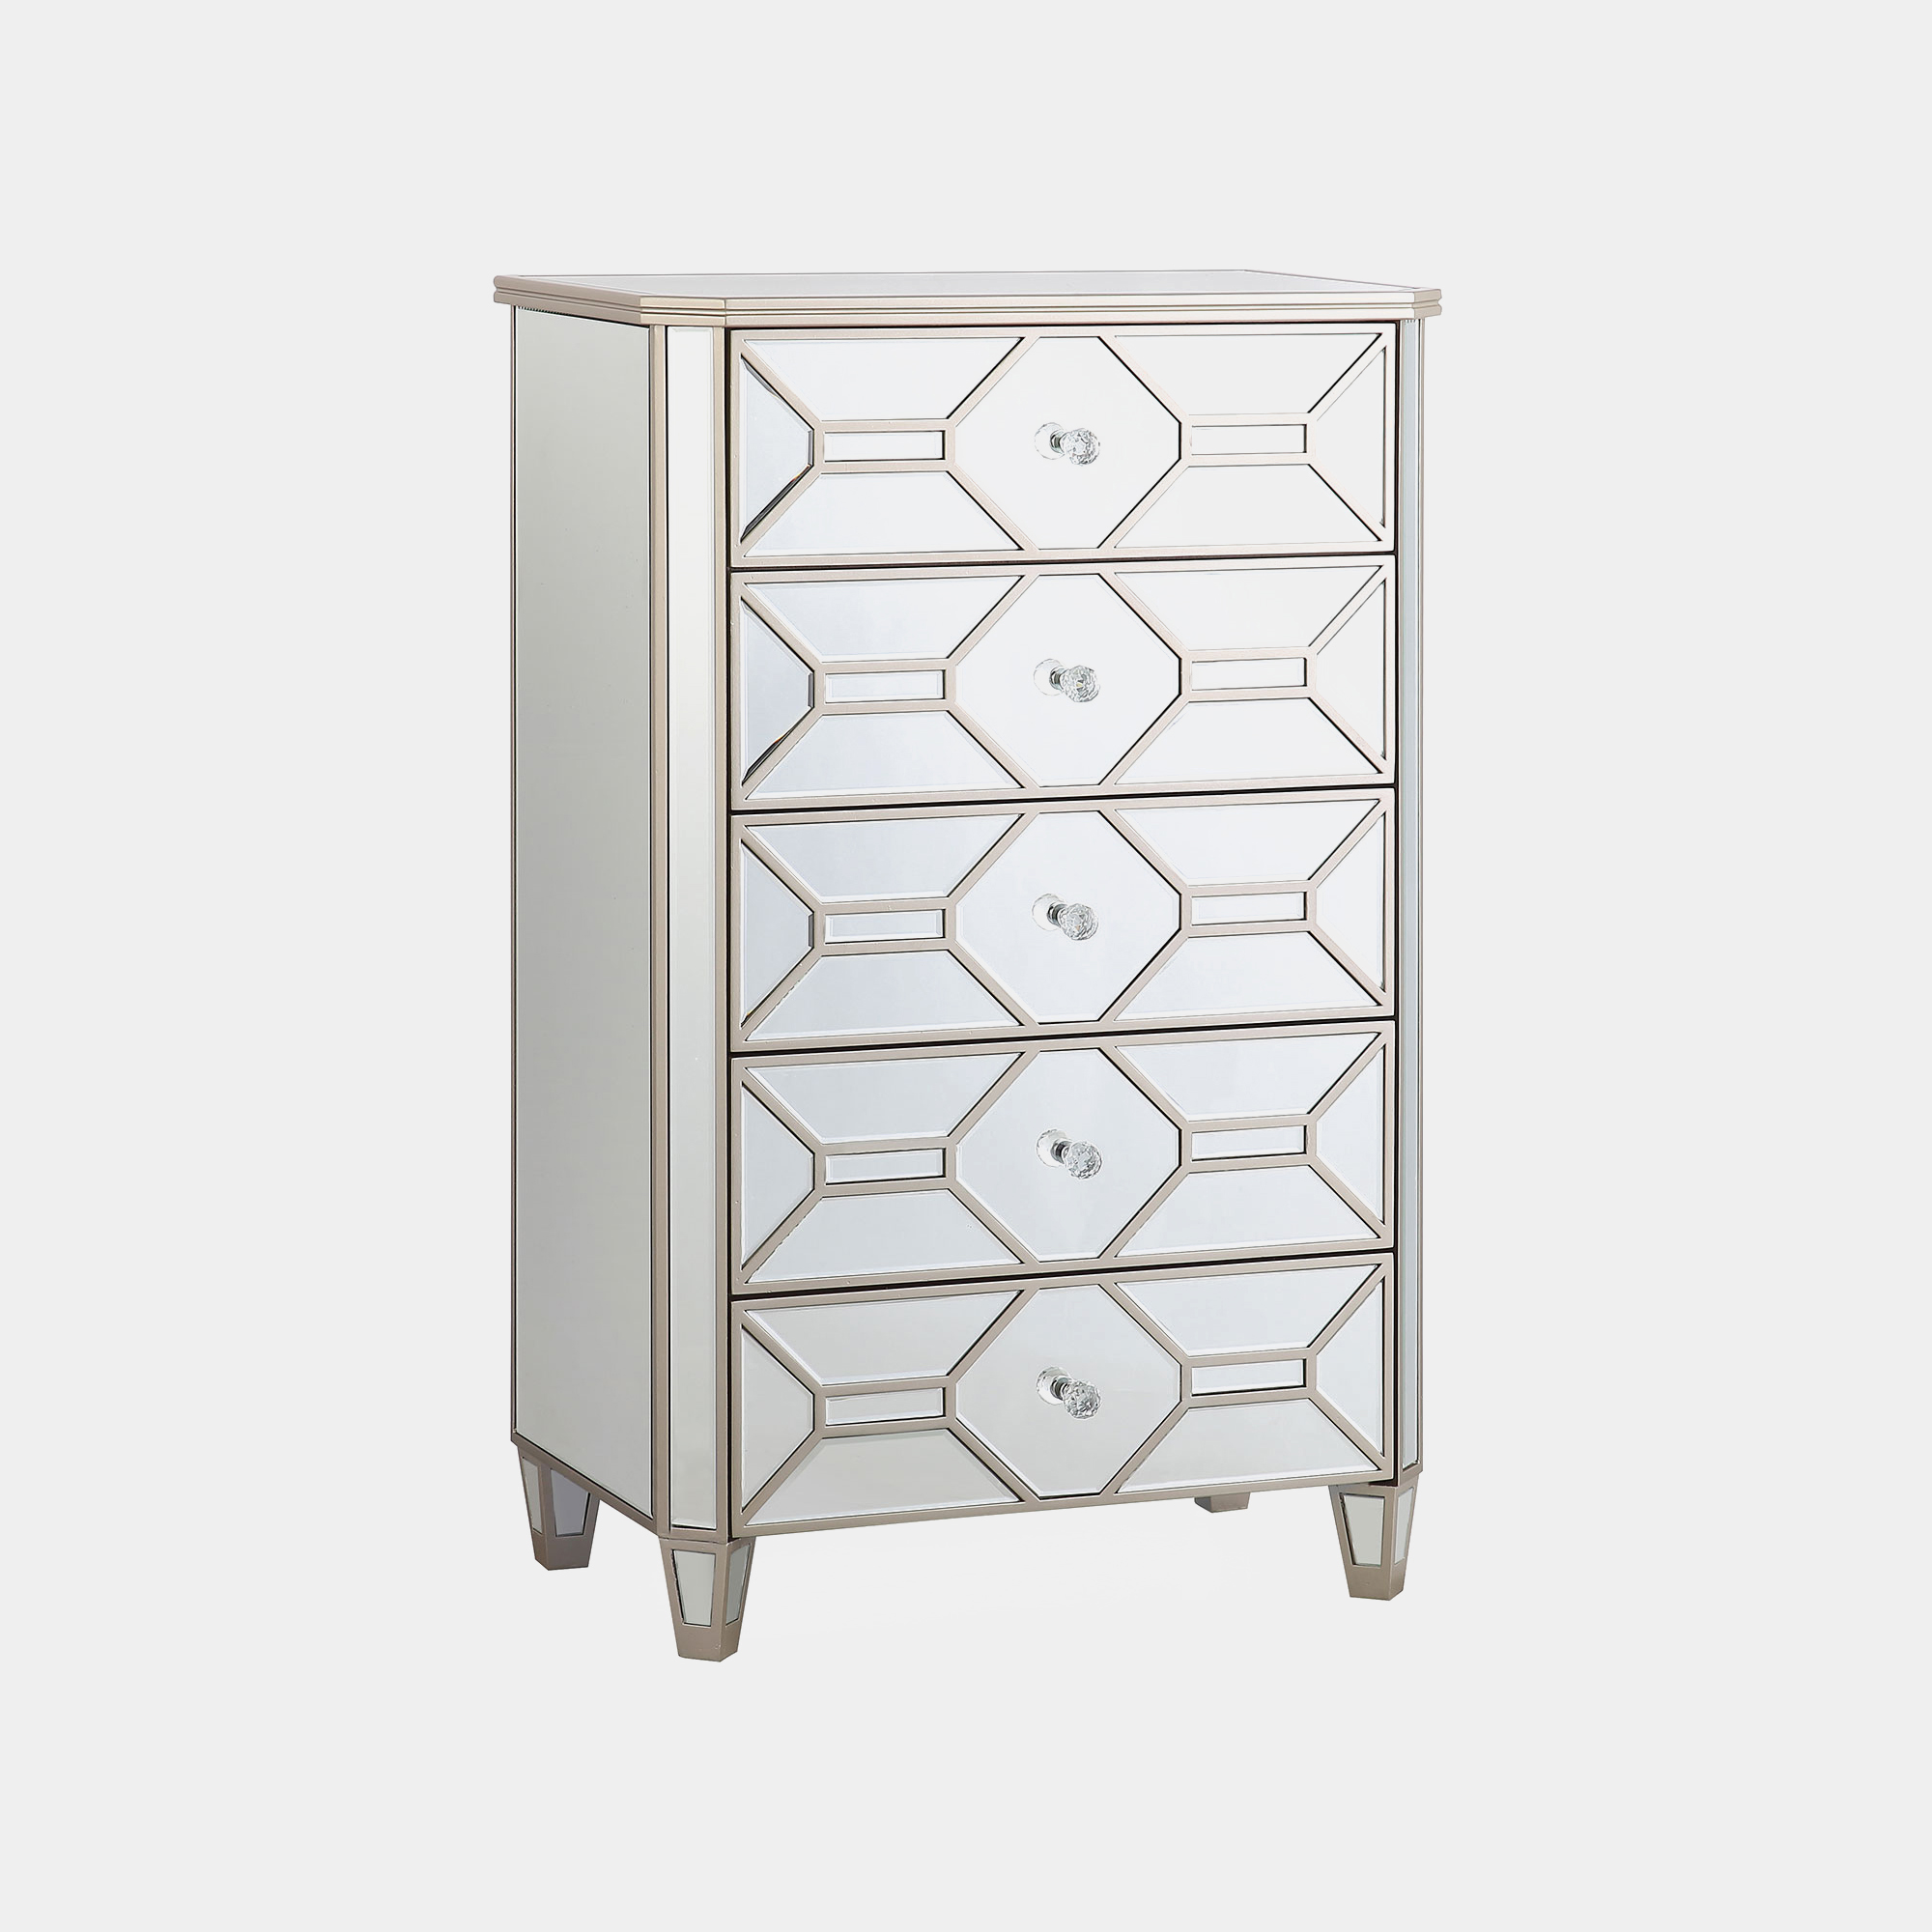 Ruby 5 Drawer Mirrored Tall Chest, Tall Mirrored Chest Of Drawers The Range